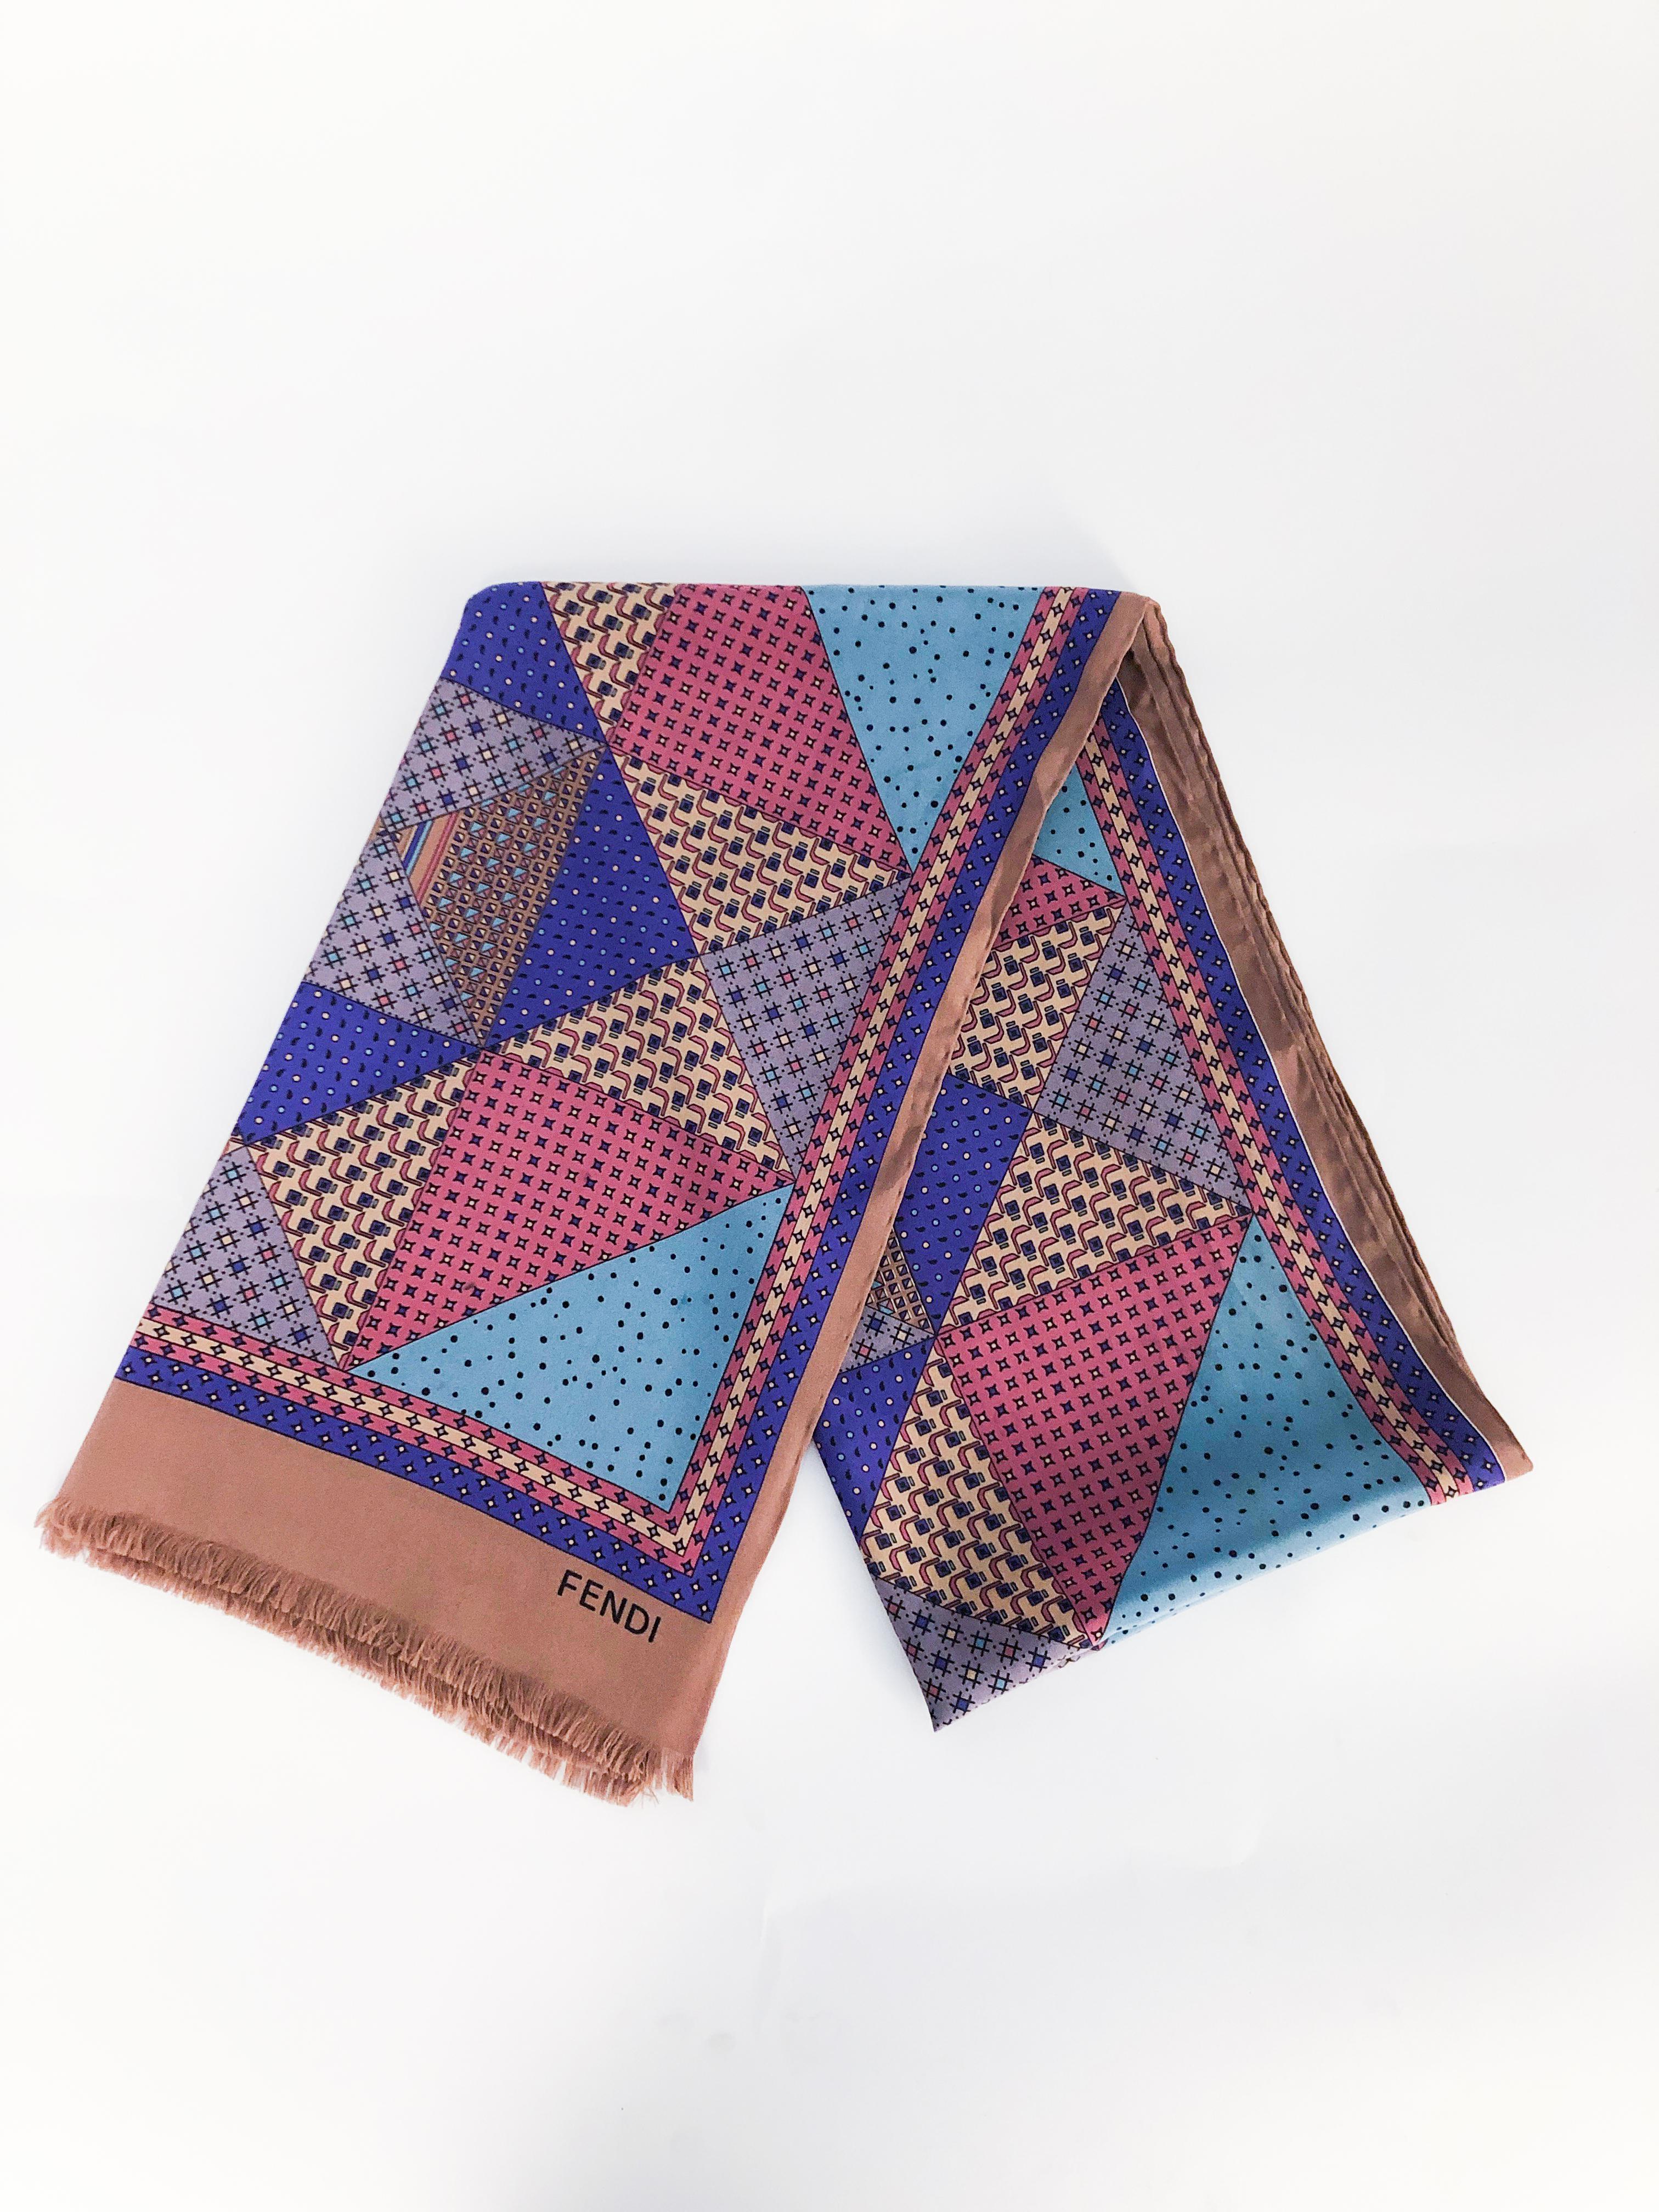 Fendi silk scarf with geometric print (featuring lilac, coral, violet, tan, and brown) and hand rolled edges. 